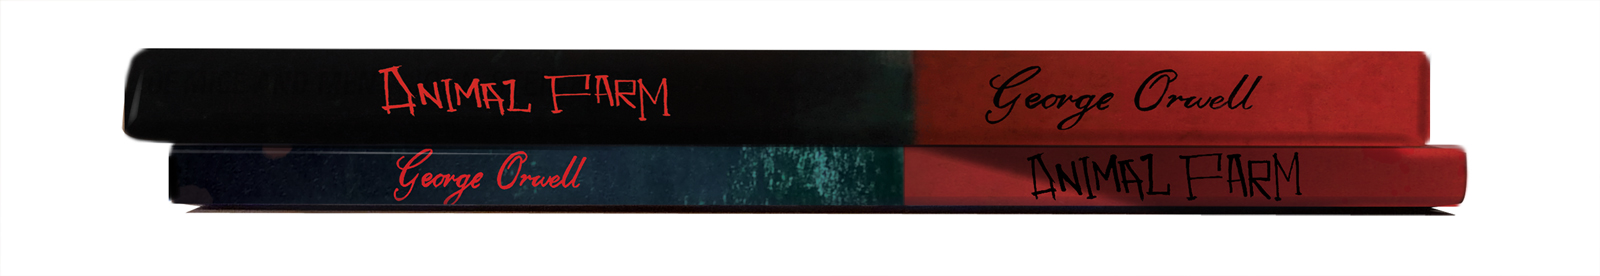 Book spines of Animal Farm